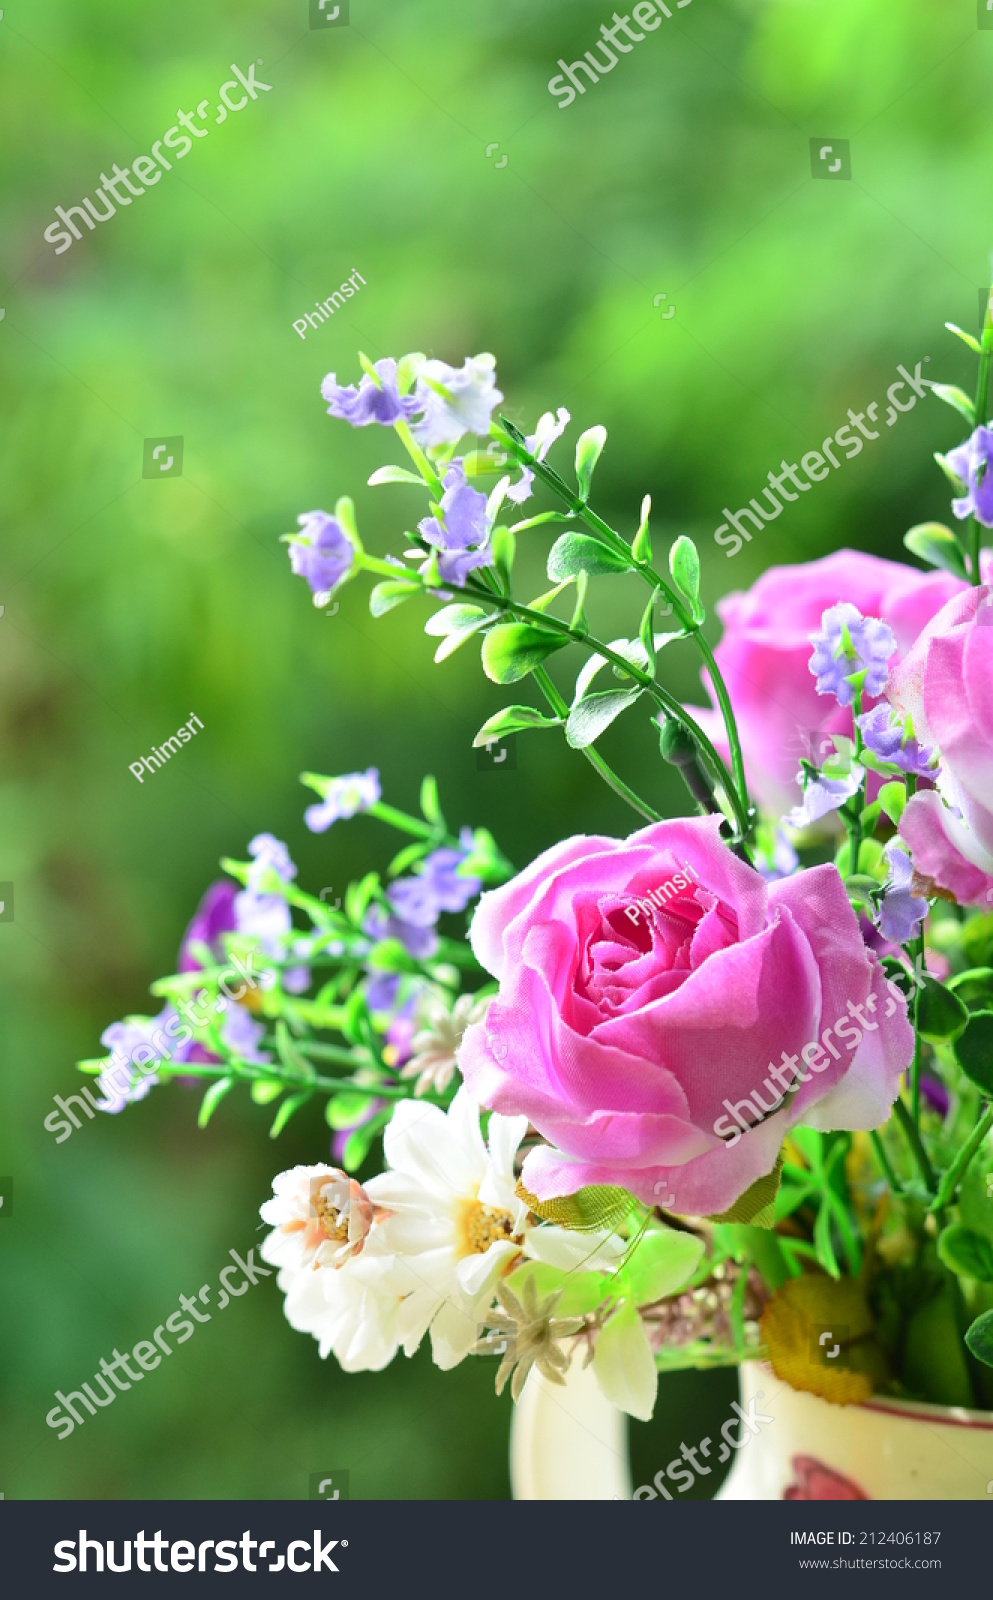 Good Morning With Bouquet Of Flowers Stock Photo 212406187